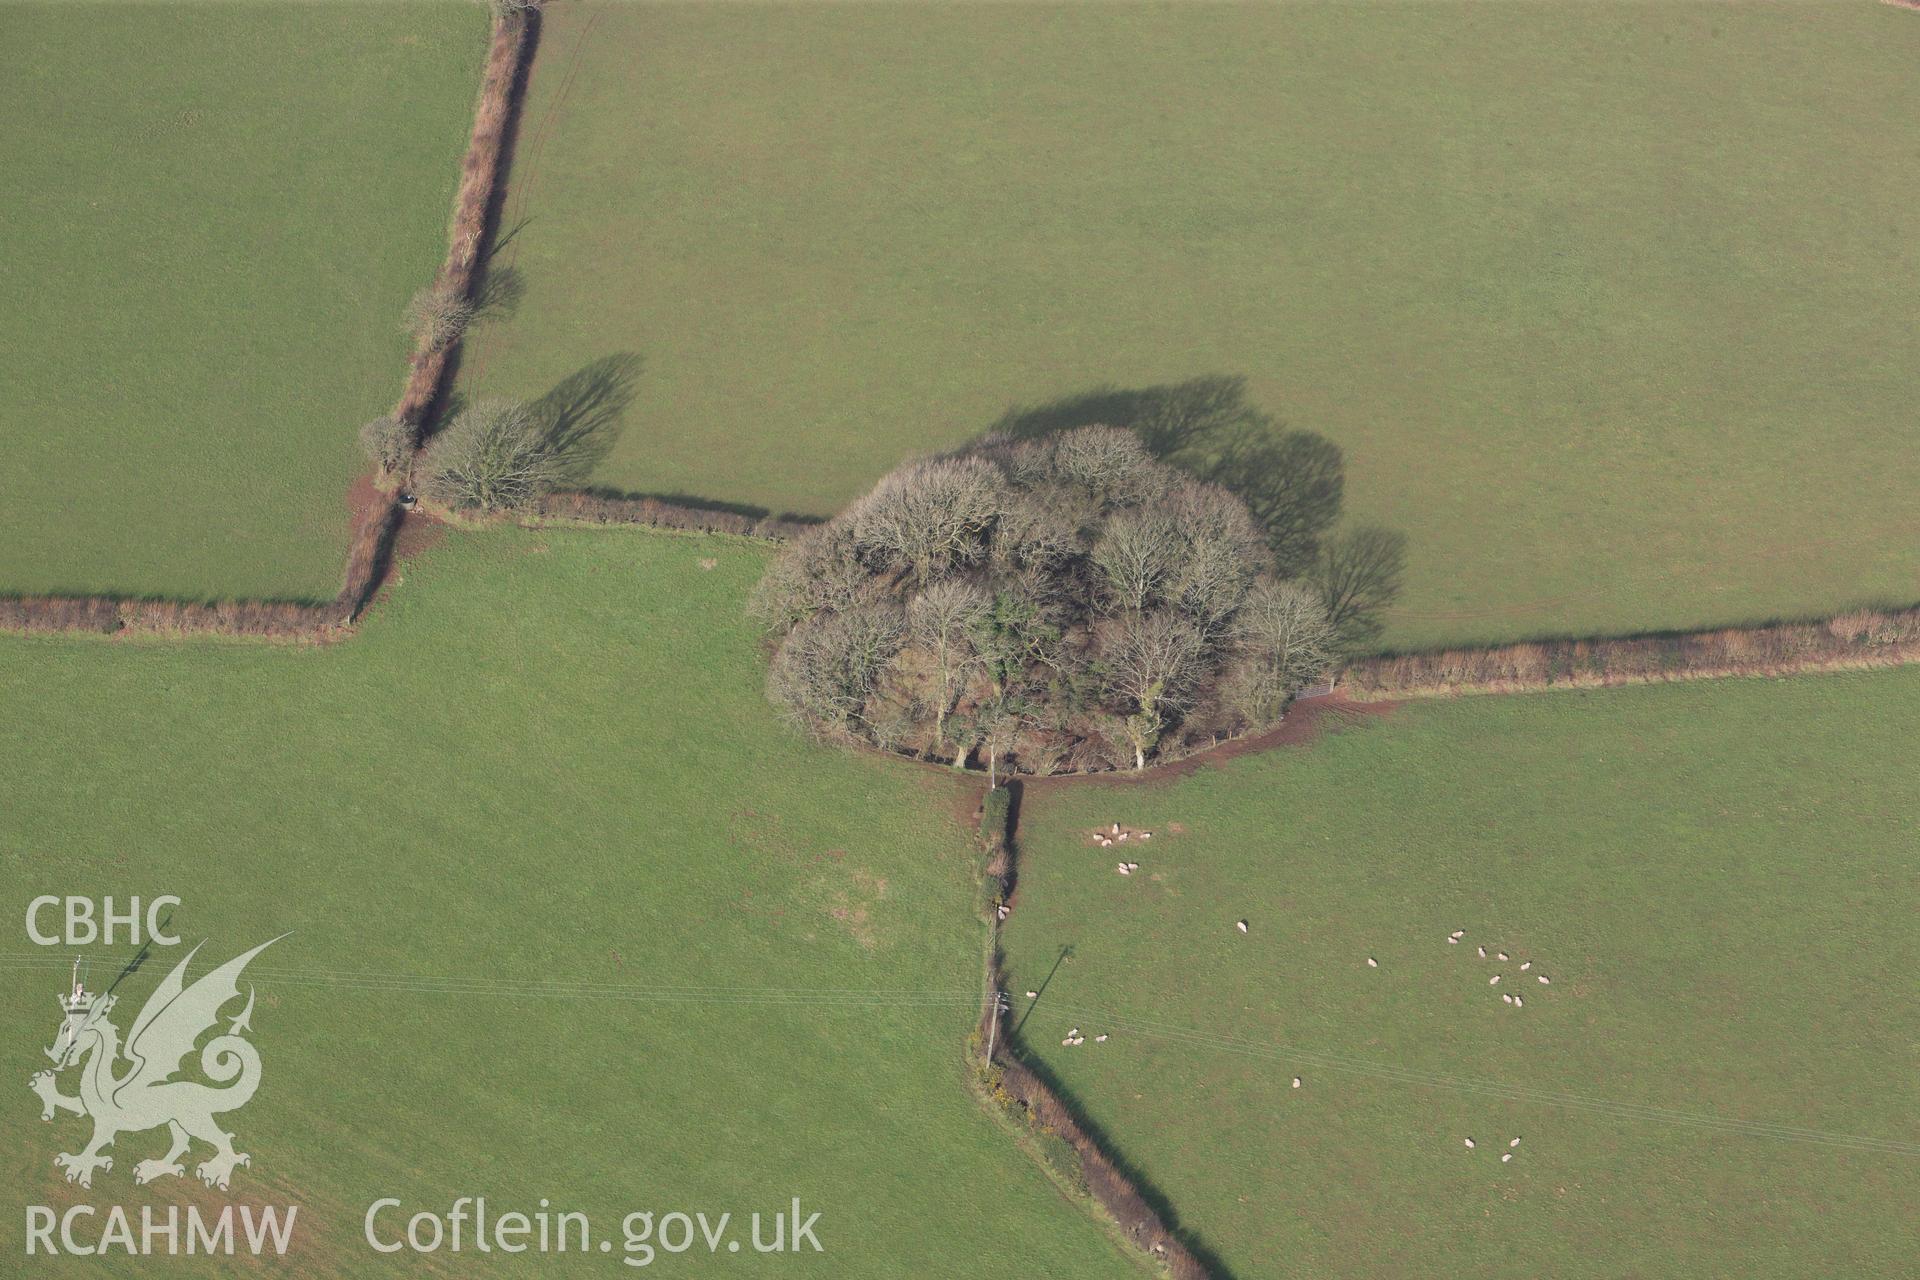 RCAHMW colour oblique photograph of Banc-y-Bettws Motte. Taken by Toby Driver on 27/01/2012.